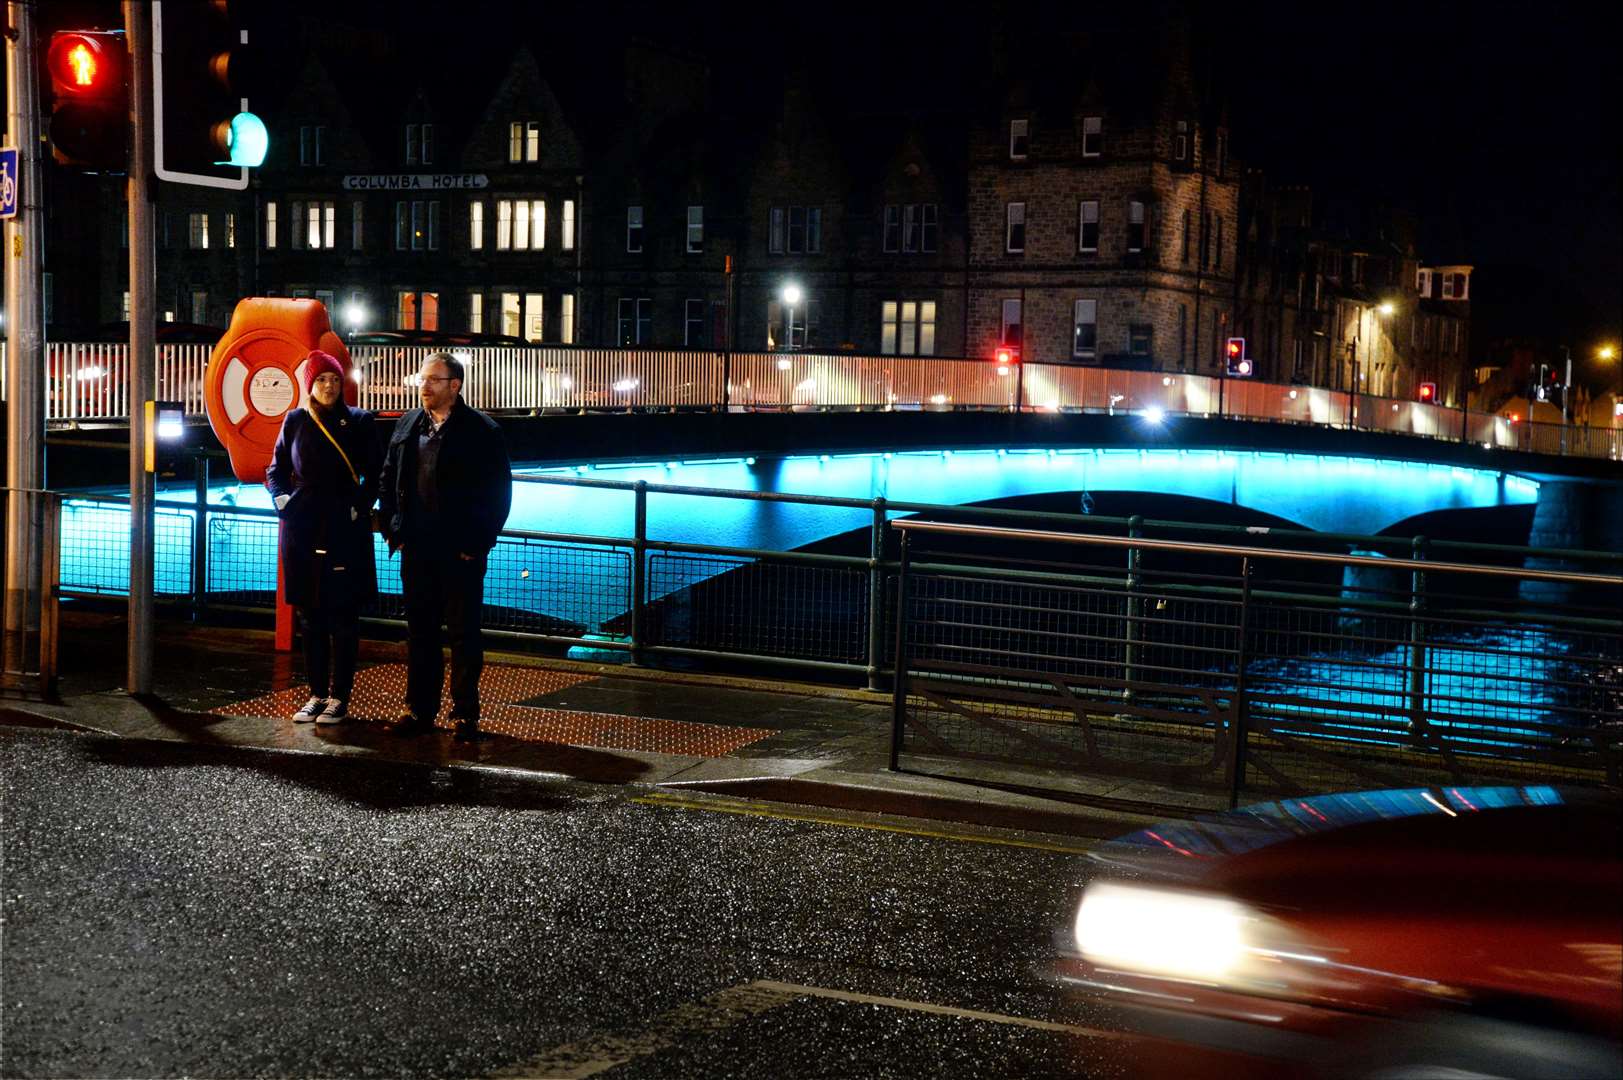 Ness Bridge has been bathed in light to raise awareness of causes before.